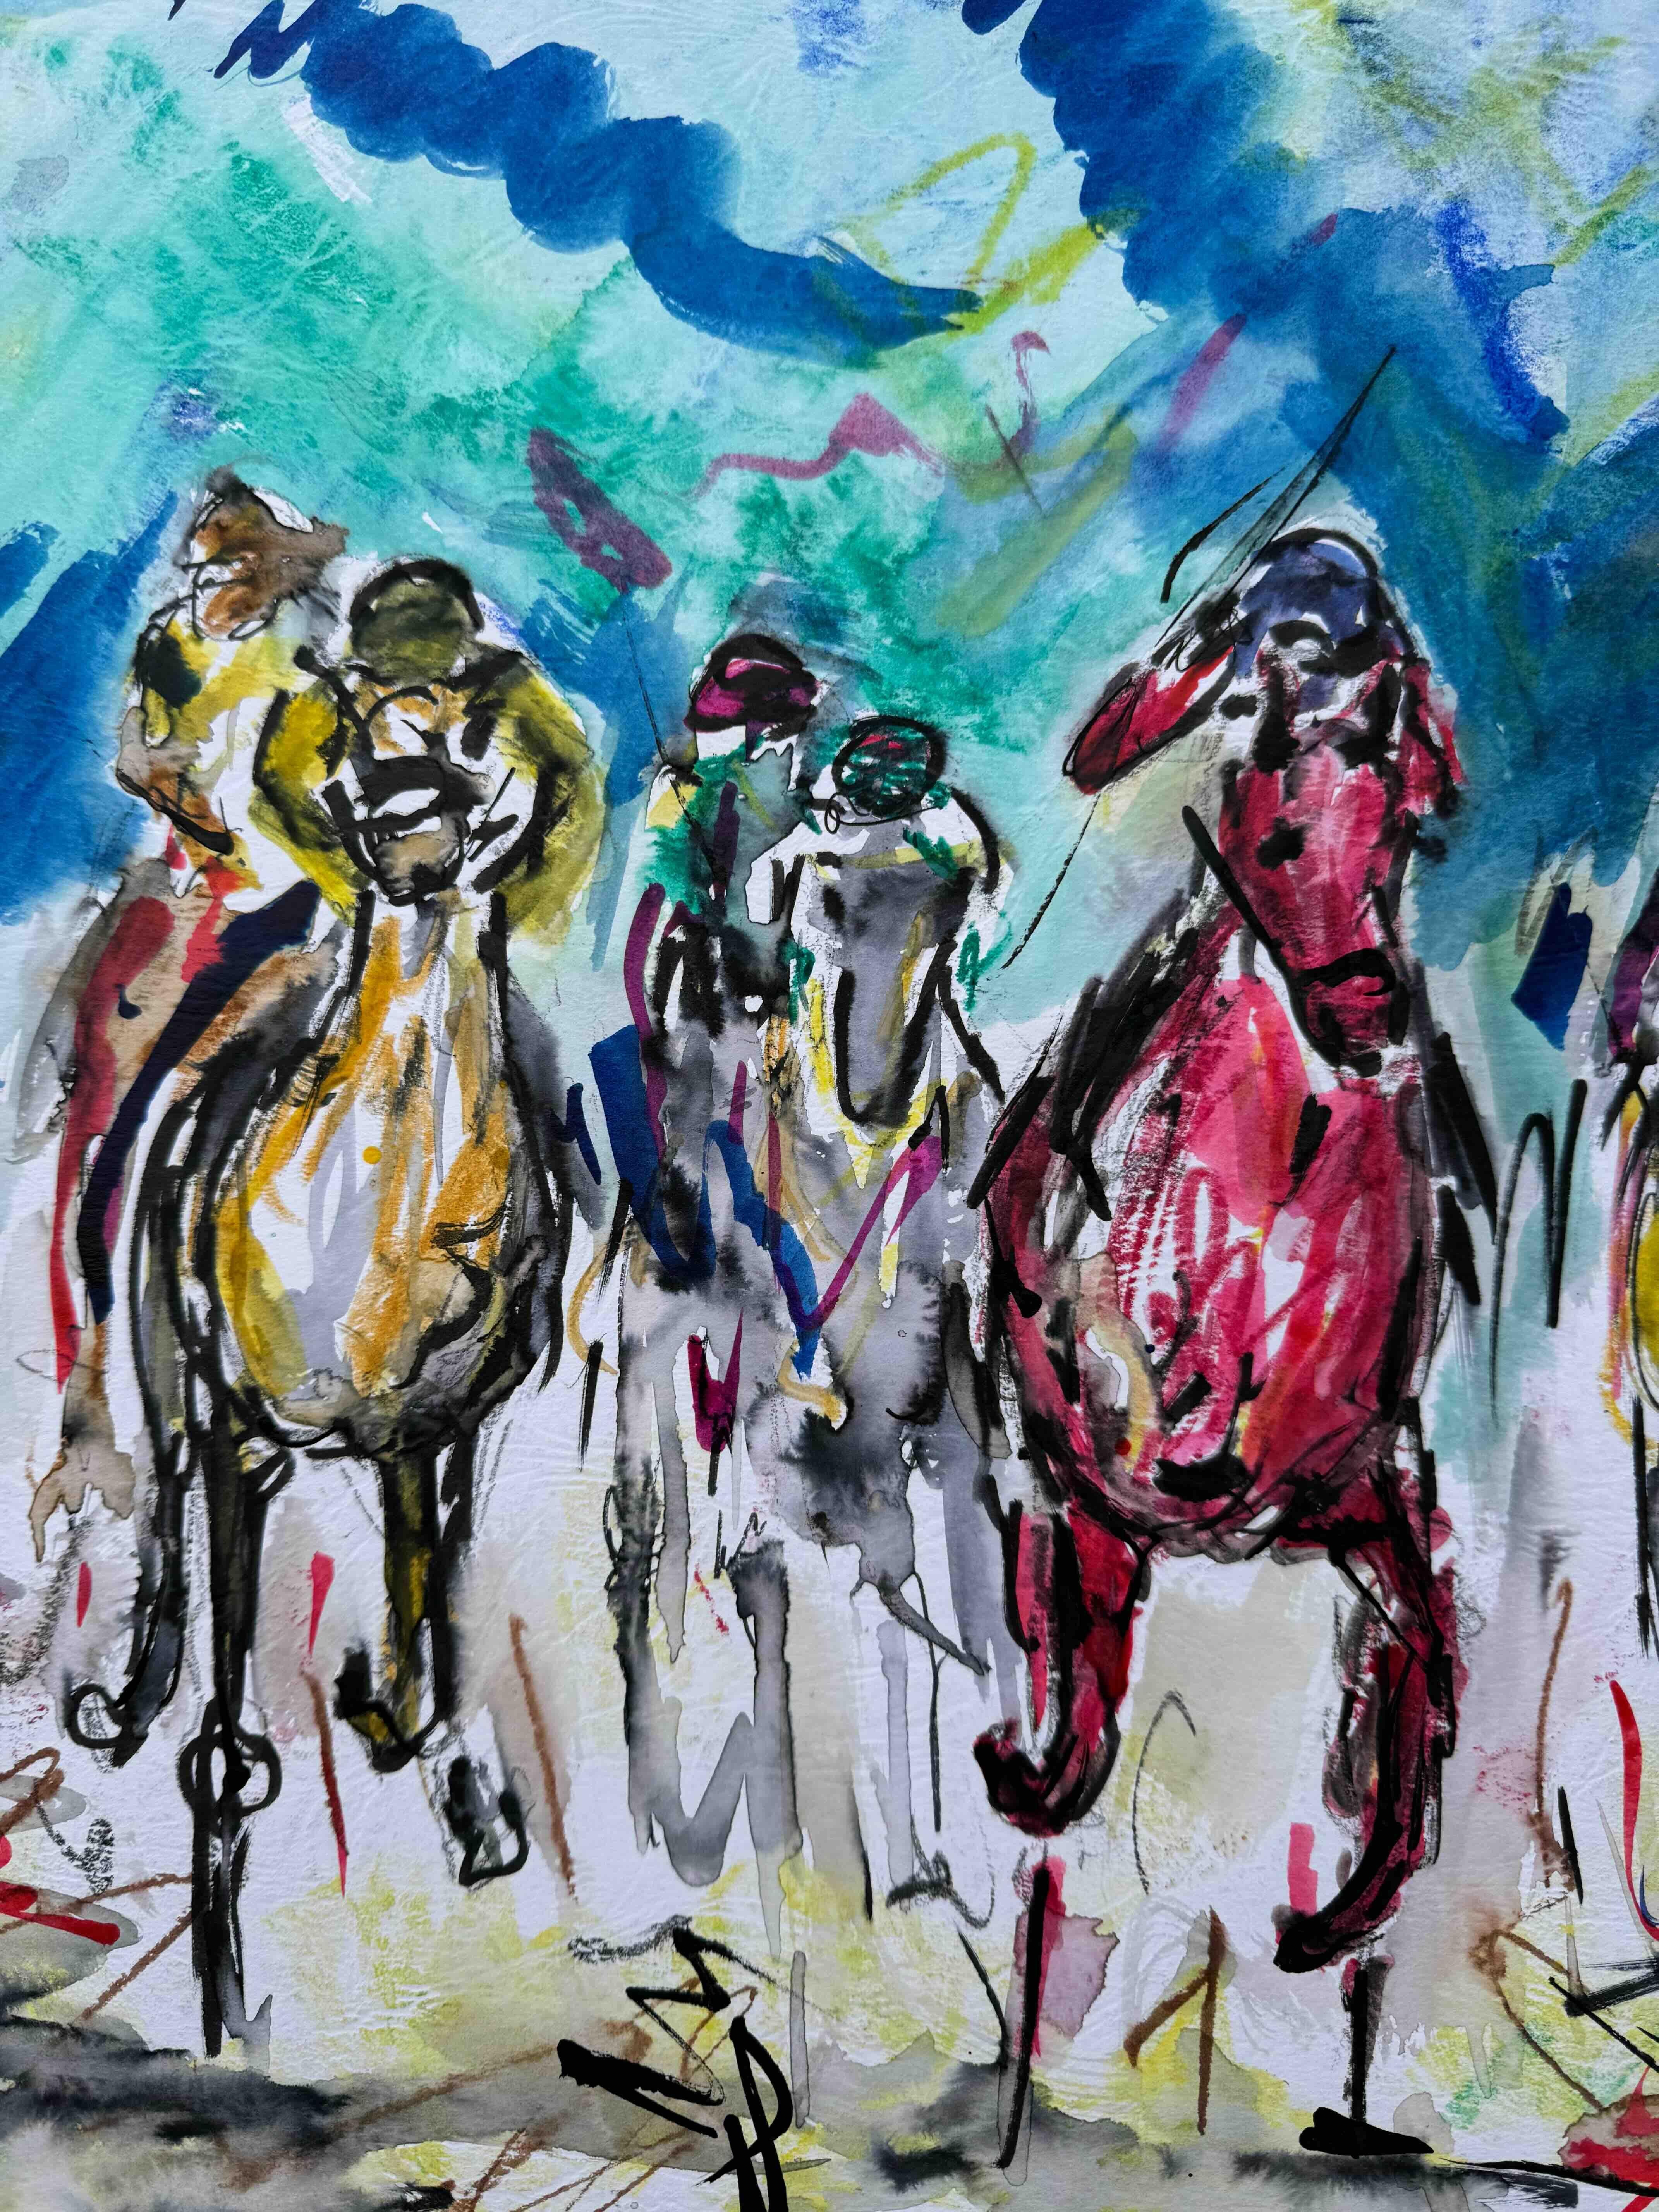 An original painting by Garth Bayley. Pen, watercolour and ink painting of the horses racing on a stormy day. 

ADDITIONAL INFORMATION:
Storm clouds over head by Garth Bayley [2020]
Original painting
Pen, watercolour and ink painting on watercolour